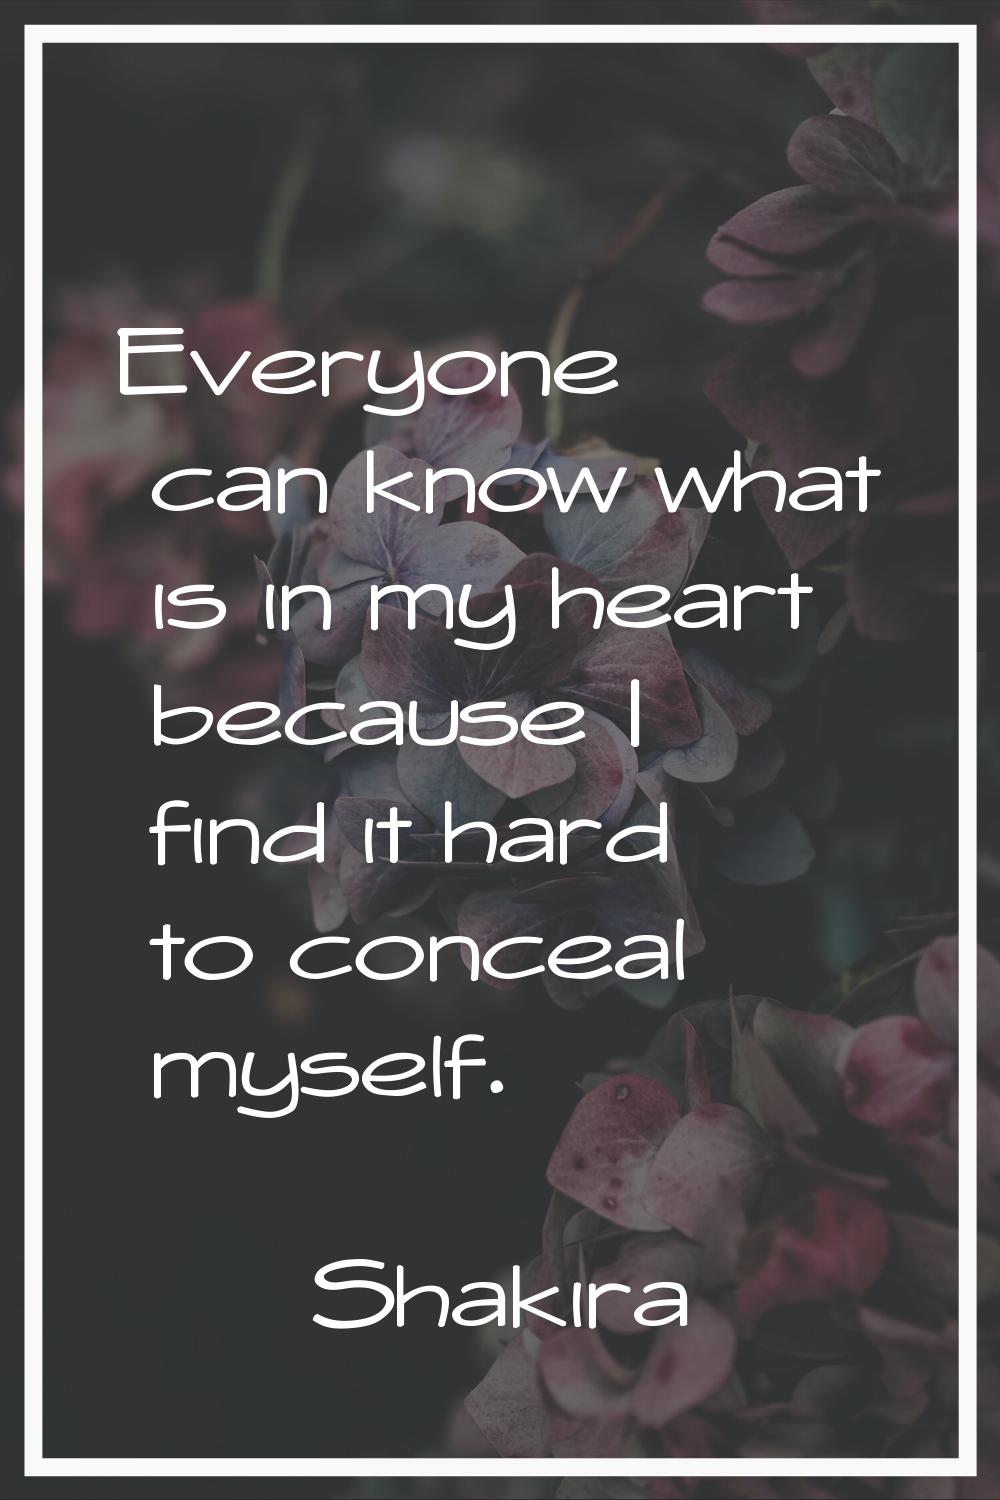 Everyone can know what is in my heart because I find it hard to conceal myself.